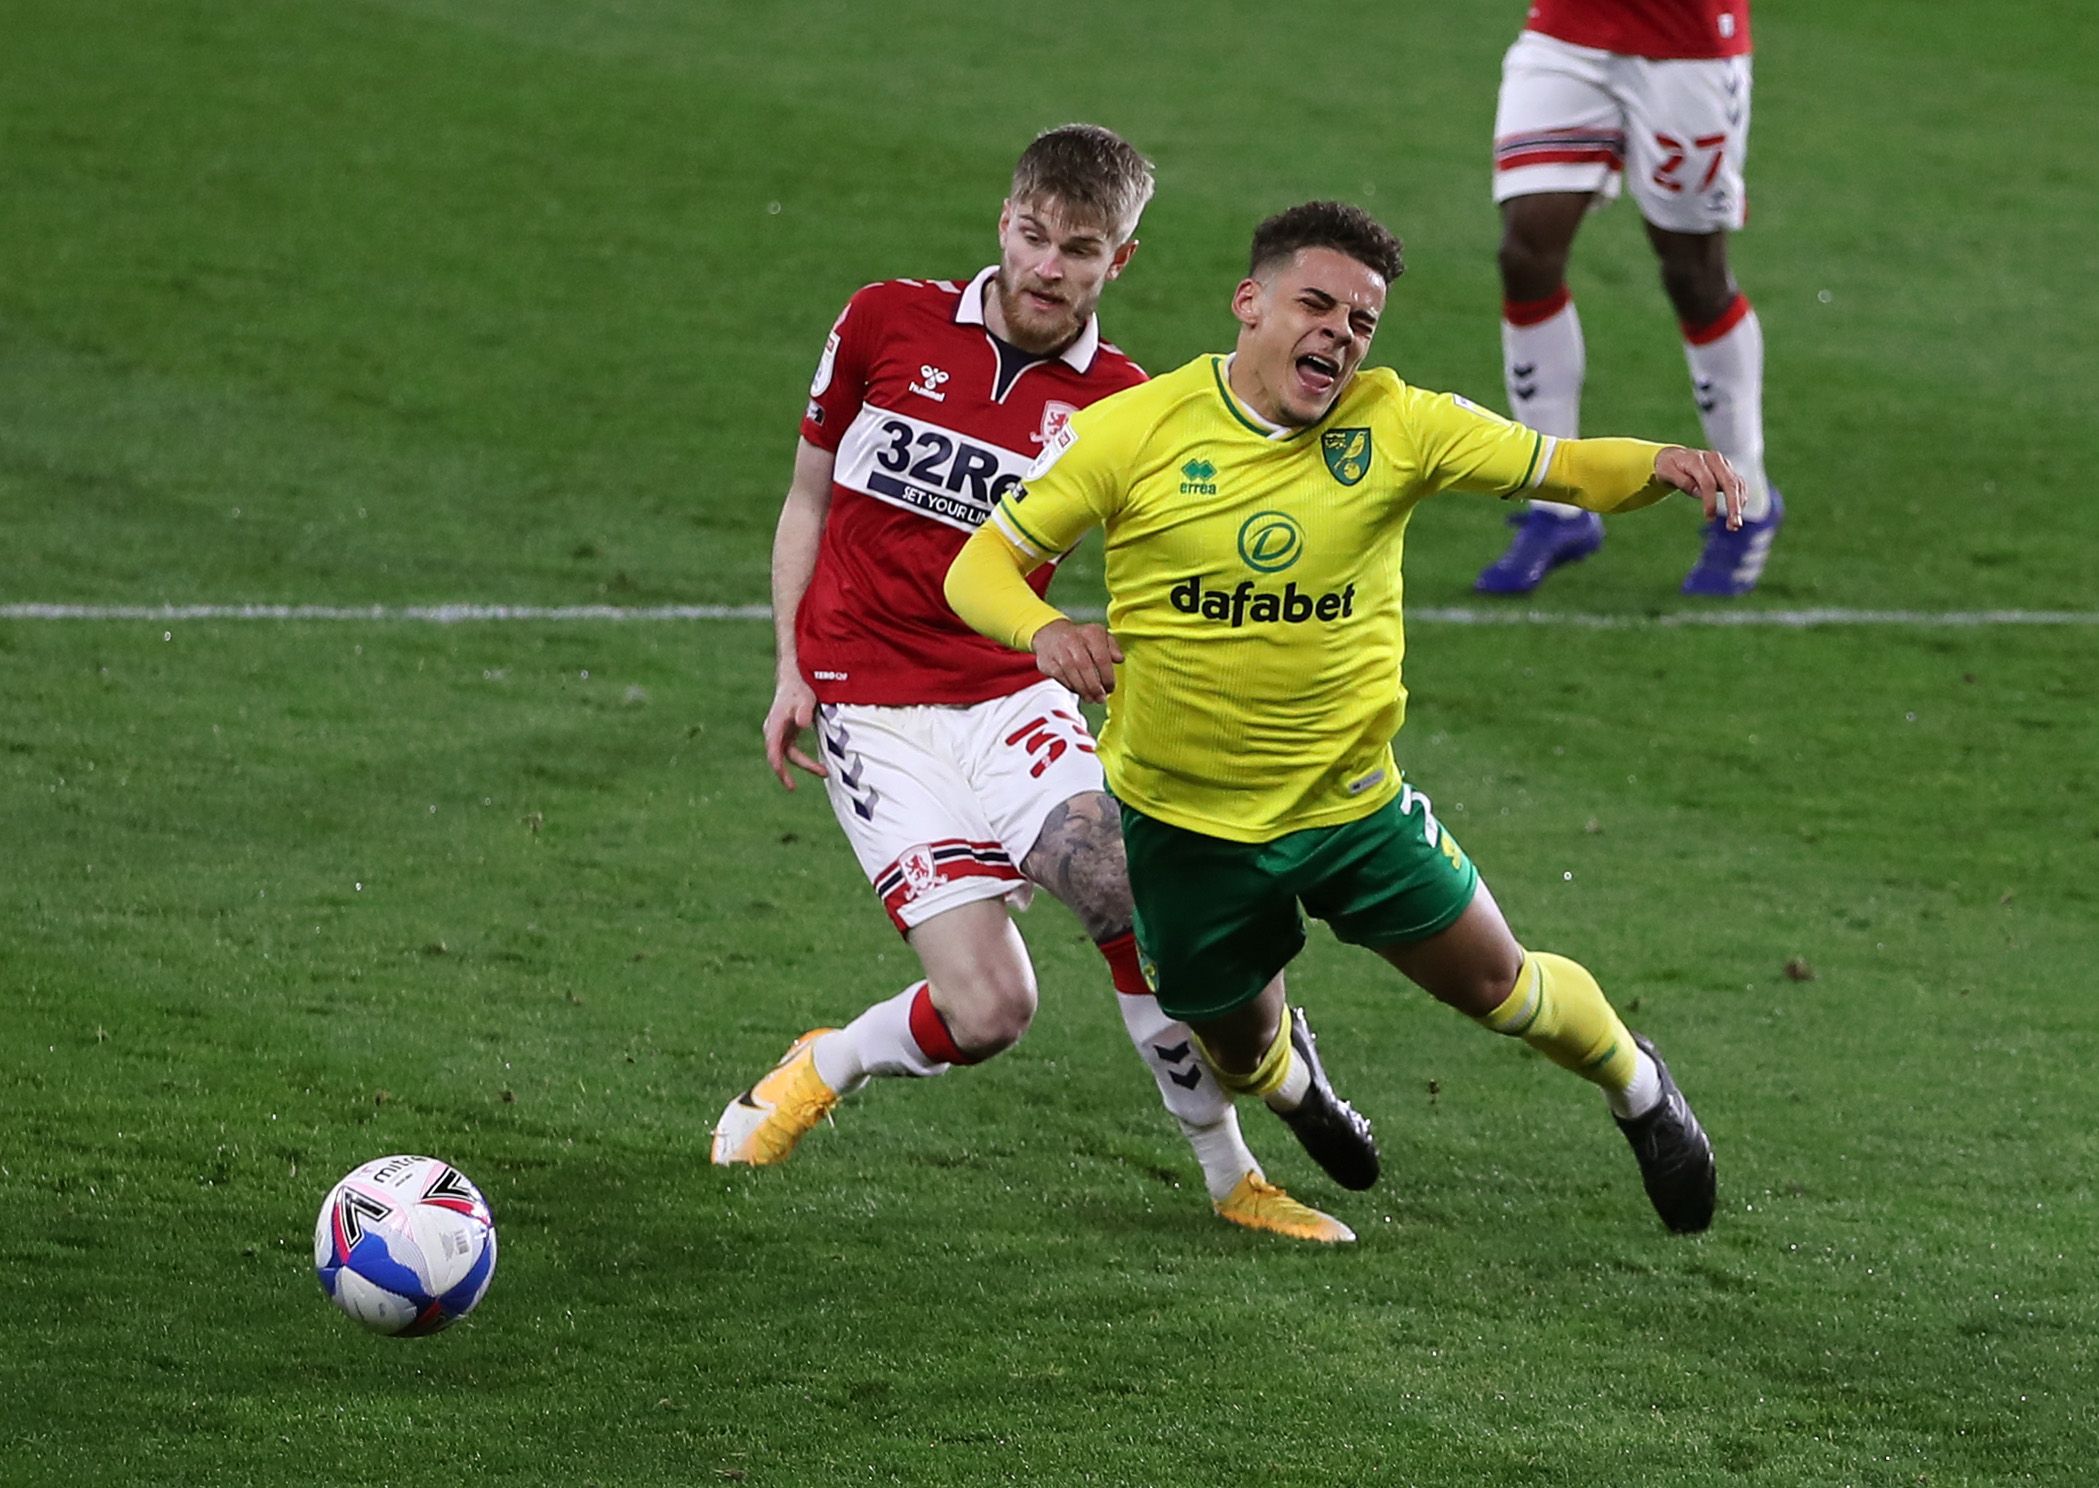 Soccer Football - Championship - Middlesbrough v Norwich City - Riverside Stadium, Middlesbrough, Britain - November 21, 2020 Middlesbrough's Hayden Coulson fouls Norwich City's Max Aarons to give away a penalty Action Images/Molly Darlington EDITORIAL USE ONLY. No use with unauthorized audio, video, data, fixture lists, club/league logos or 'live' services. Online in-match use limited to 75 images, no video emulation. No use in betting, games or single club /league/player publications.  Please 